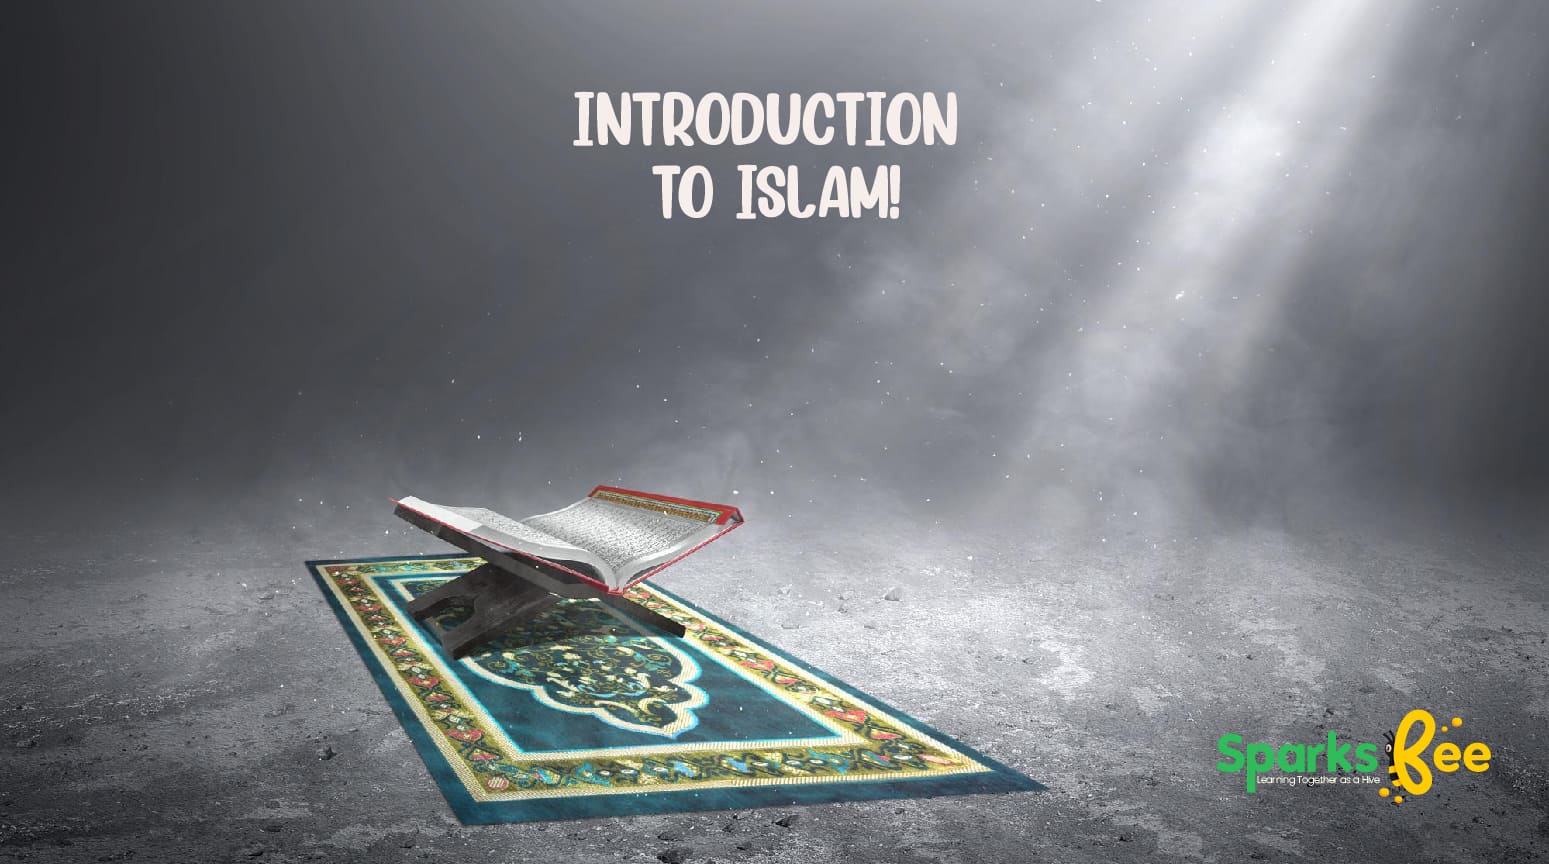 What are the benefits of online Islamic education